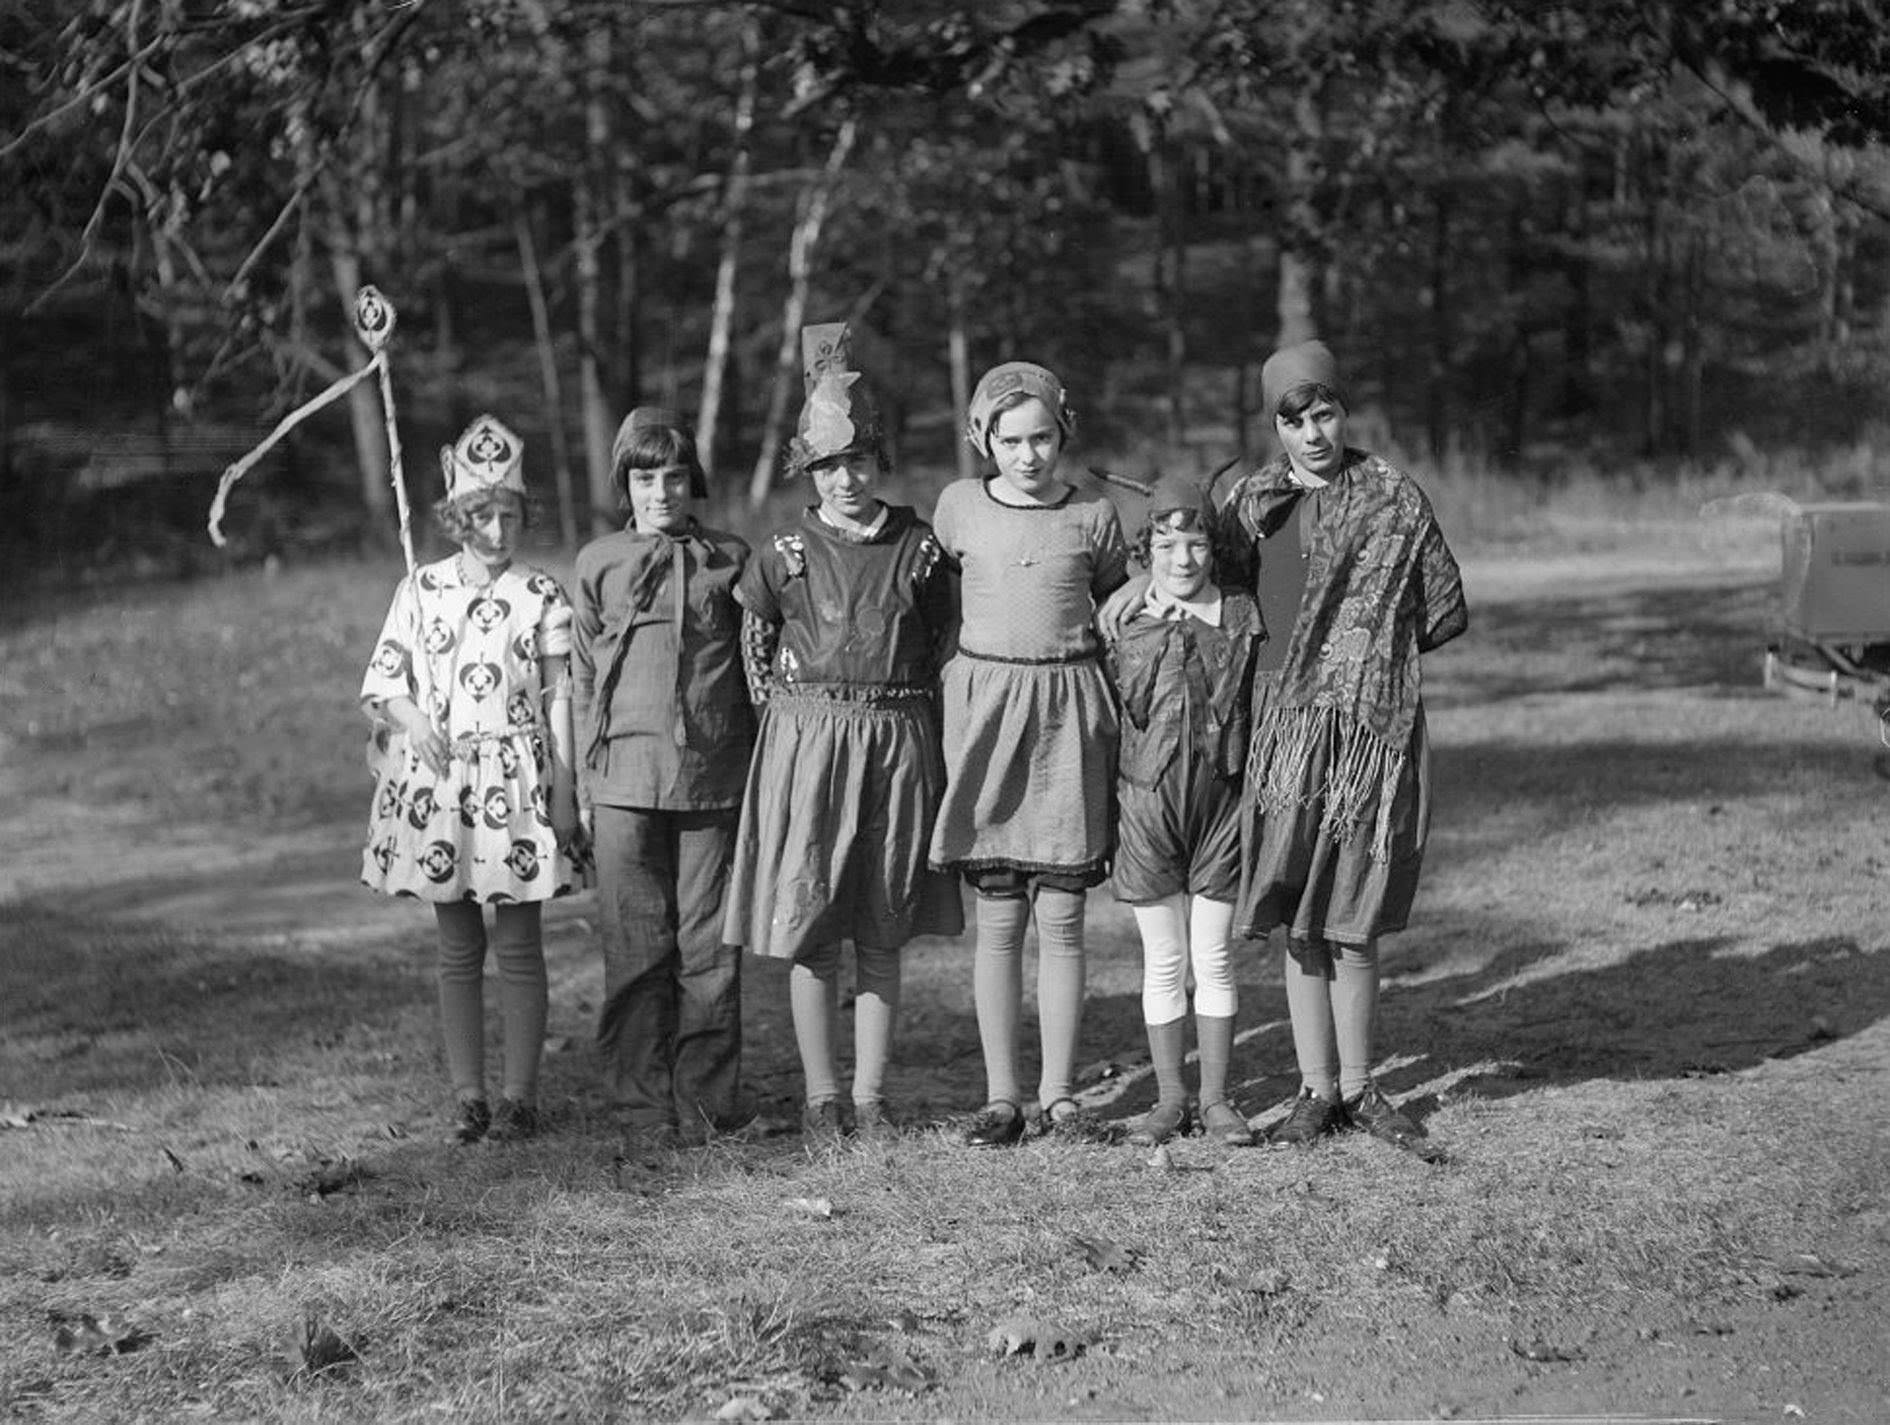 Victoria Park Forest School, Halloween party, group of six, October 28, 1929.